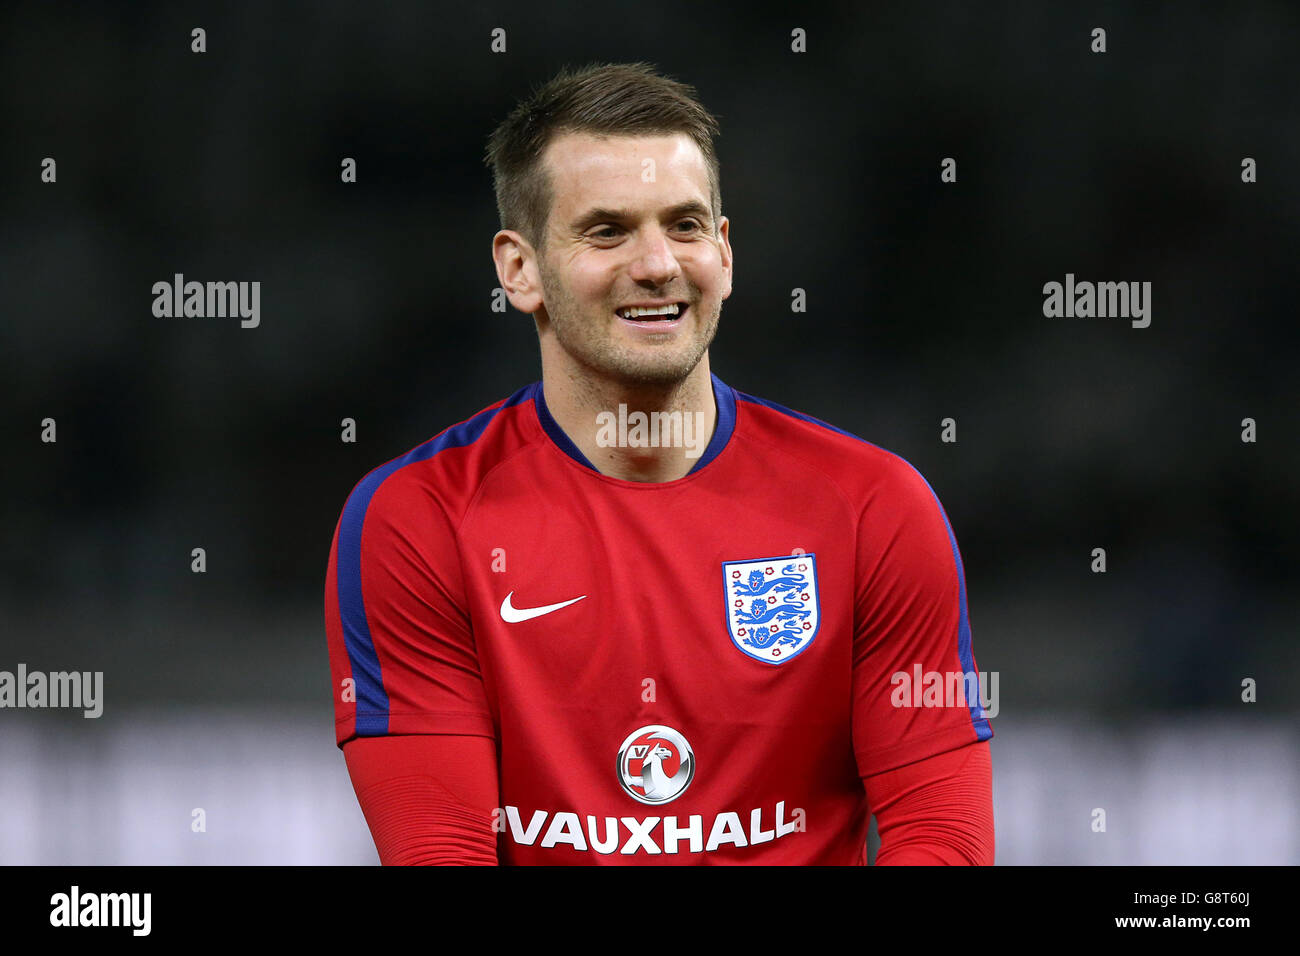 England goalkeeper Tom Heaton is all smiles during the warm-up before the International Friendly match at the Olympic Stadium, Berlin. Stock Photo